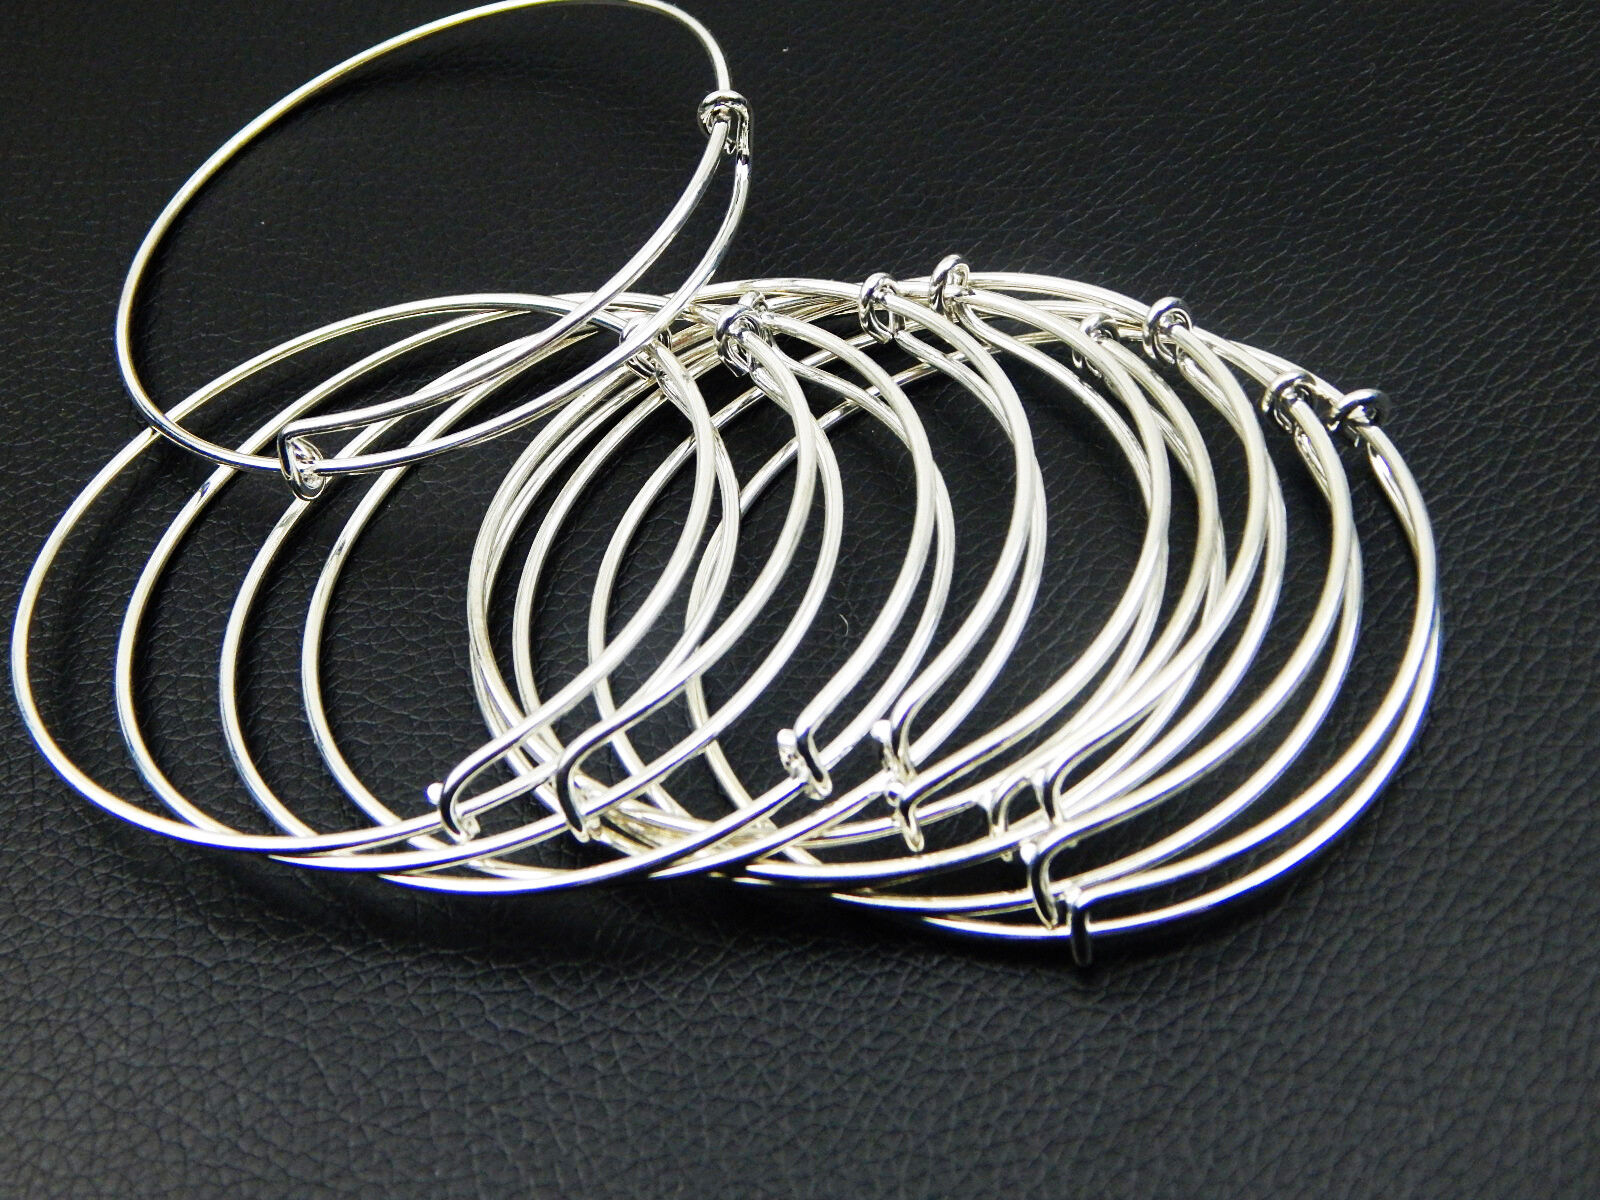 50pcs Expandable Silver Plated Bangle Bracelet Wire Wrapped Adjustable Unbranded